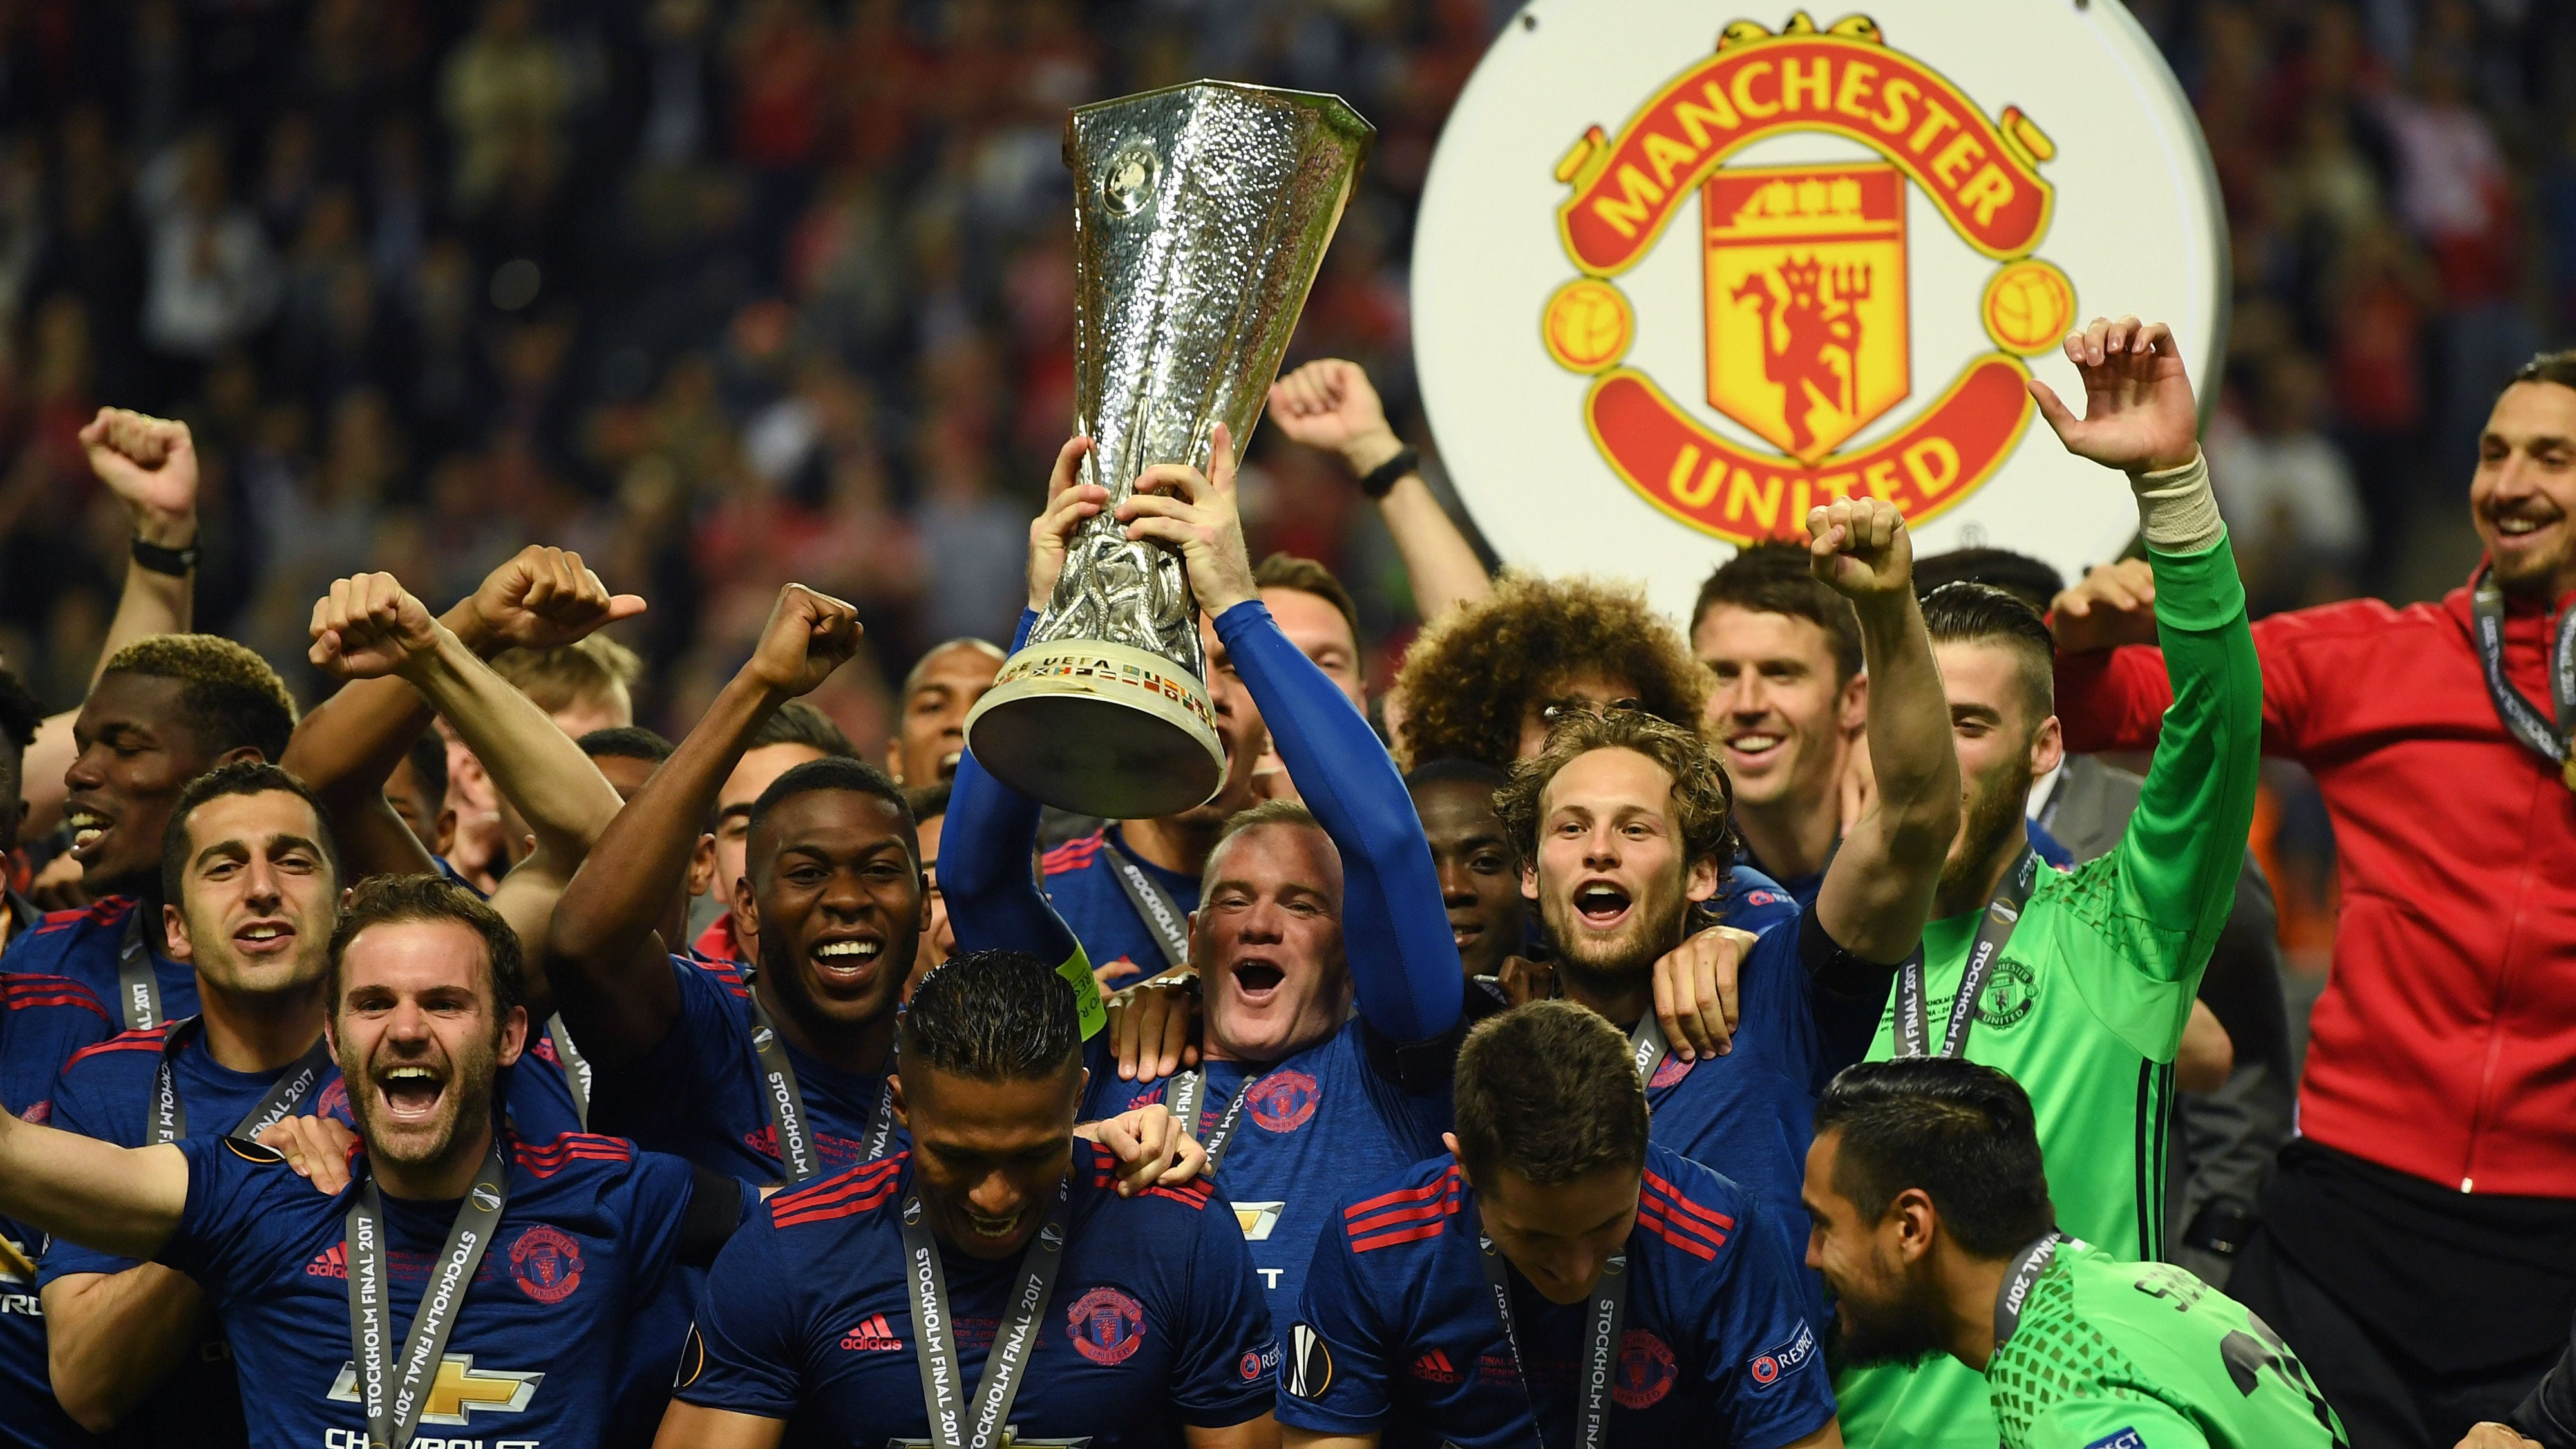 Manchester United's Europa League winning side - Who were the players and where are they now? - Goal.com